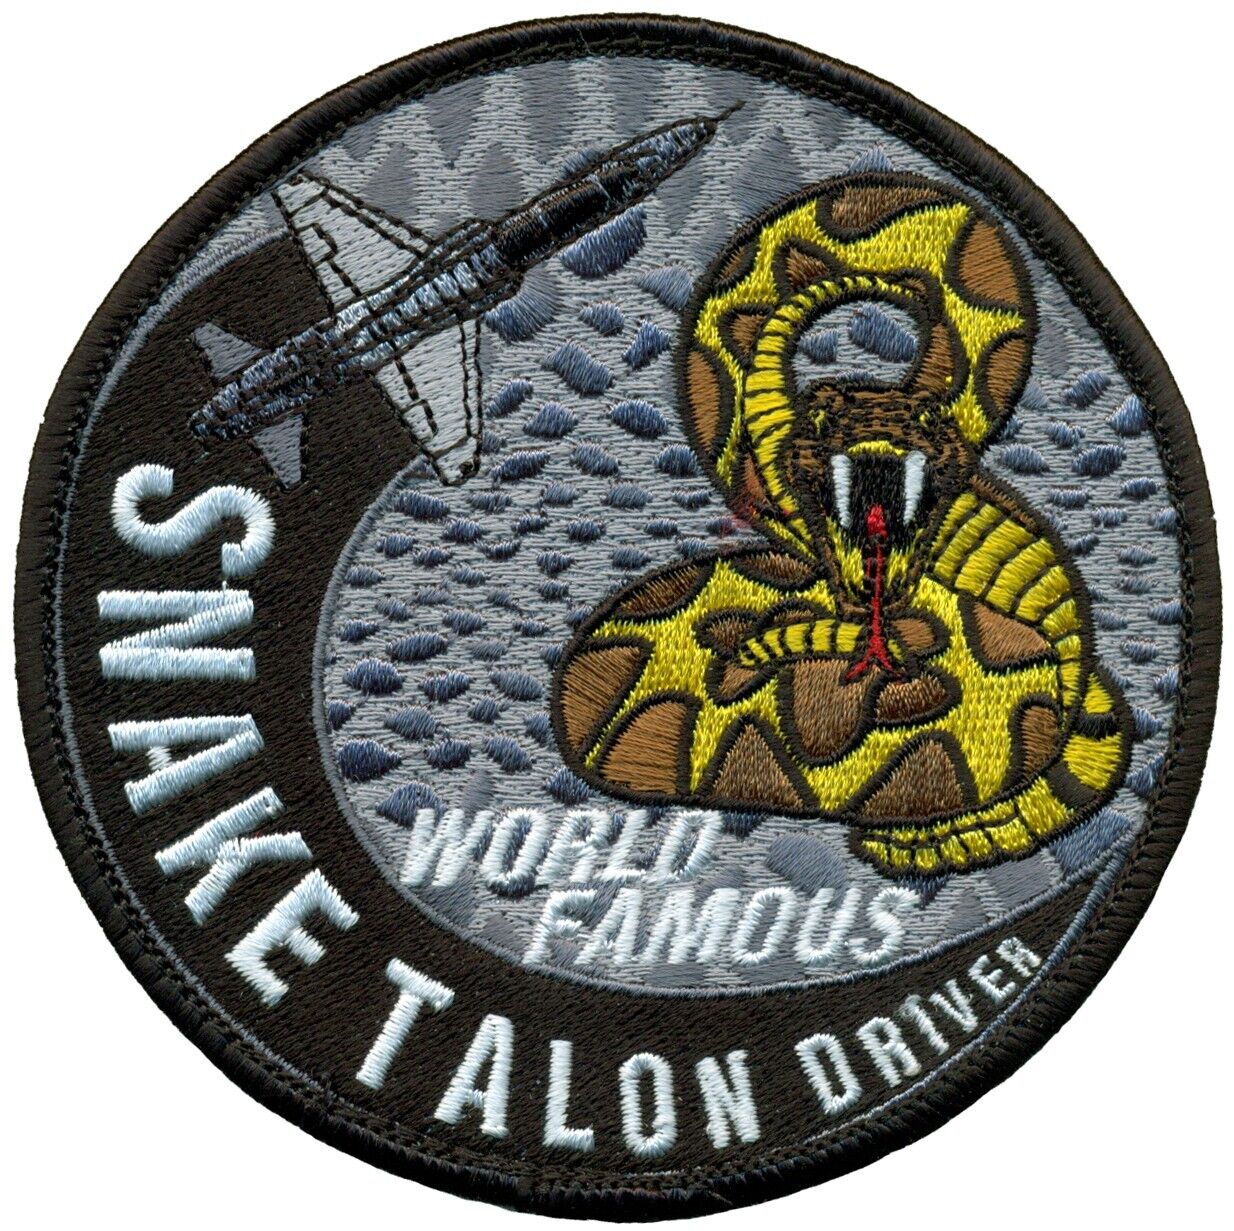 USAF 50th FLYING TRAINING SQUADRON – T-38 SNAKE TALON DRIVER PATCH